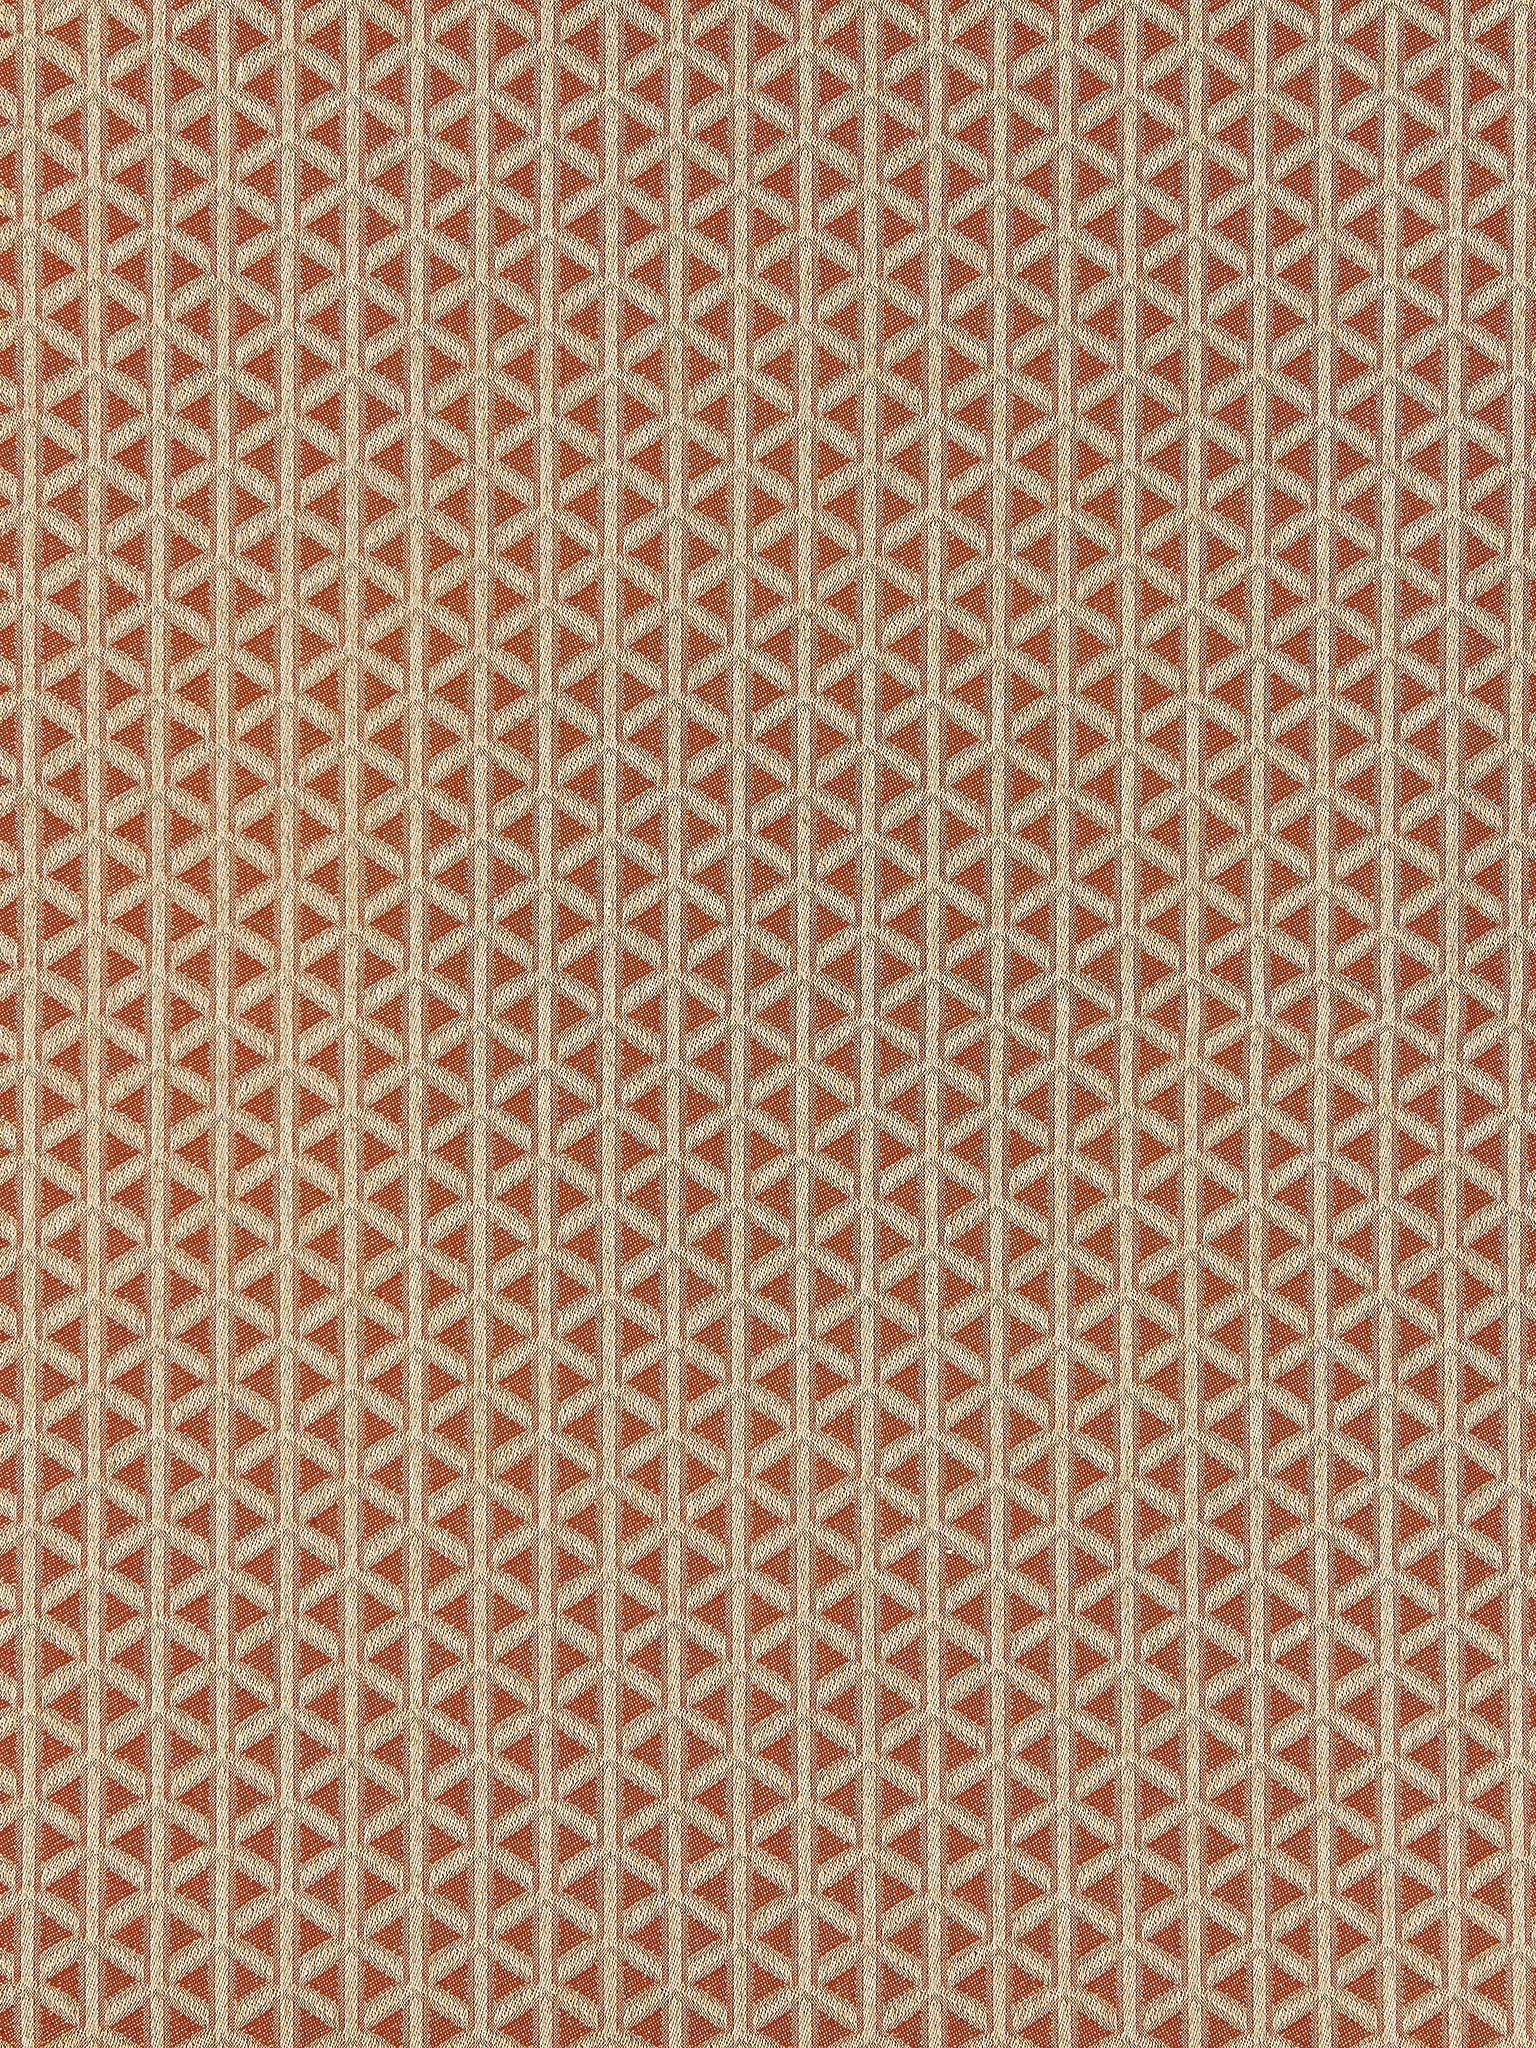 Cross Channel fabric in pimento color - pattern number NK 0004CROS - by Scalamandre in the Old World Weavers collection